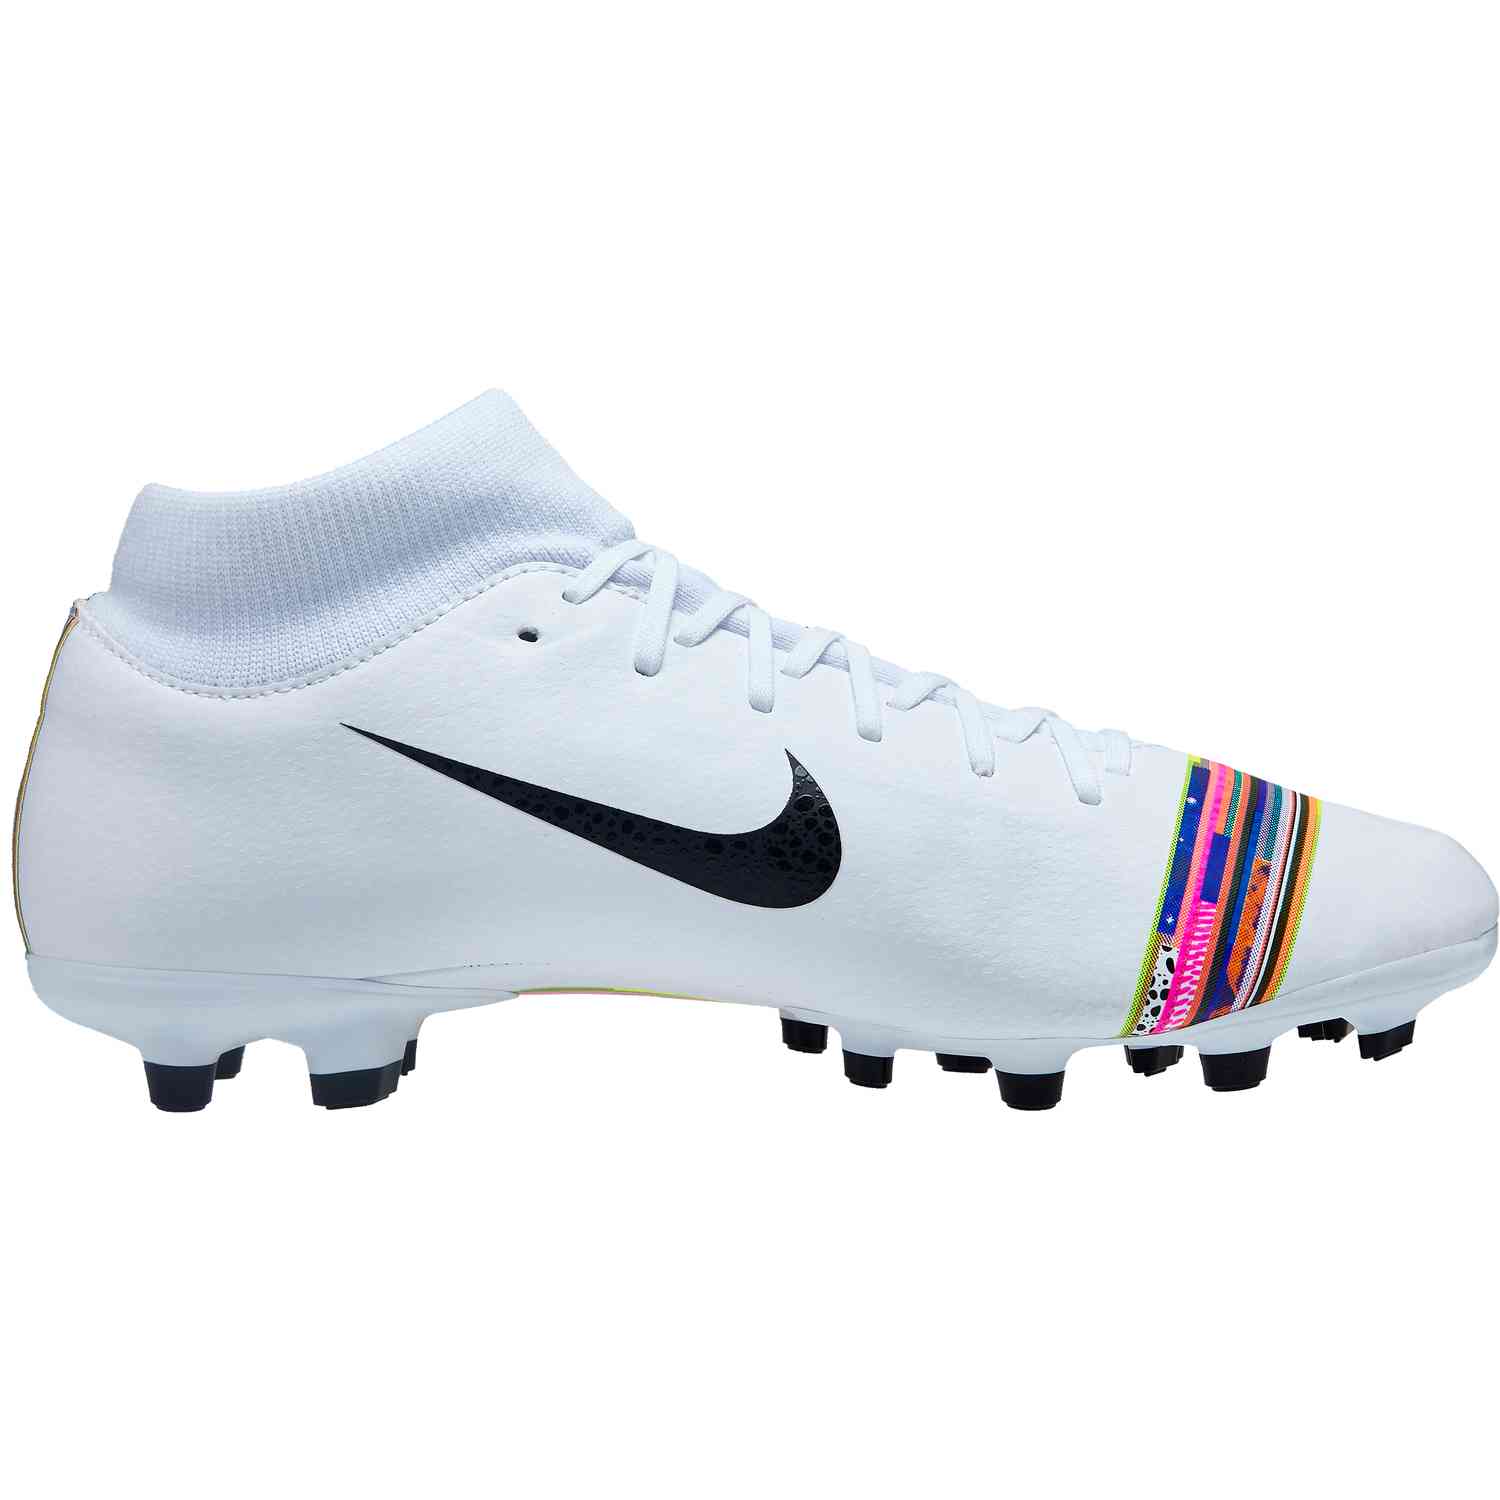 mercurial superfly 6 academy lvl up mg white/black unisex soccer cleat